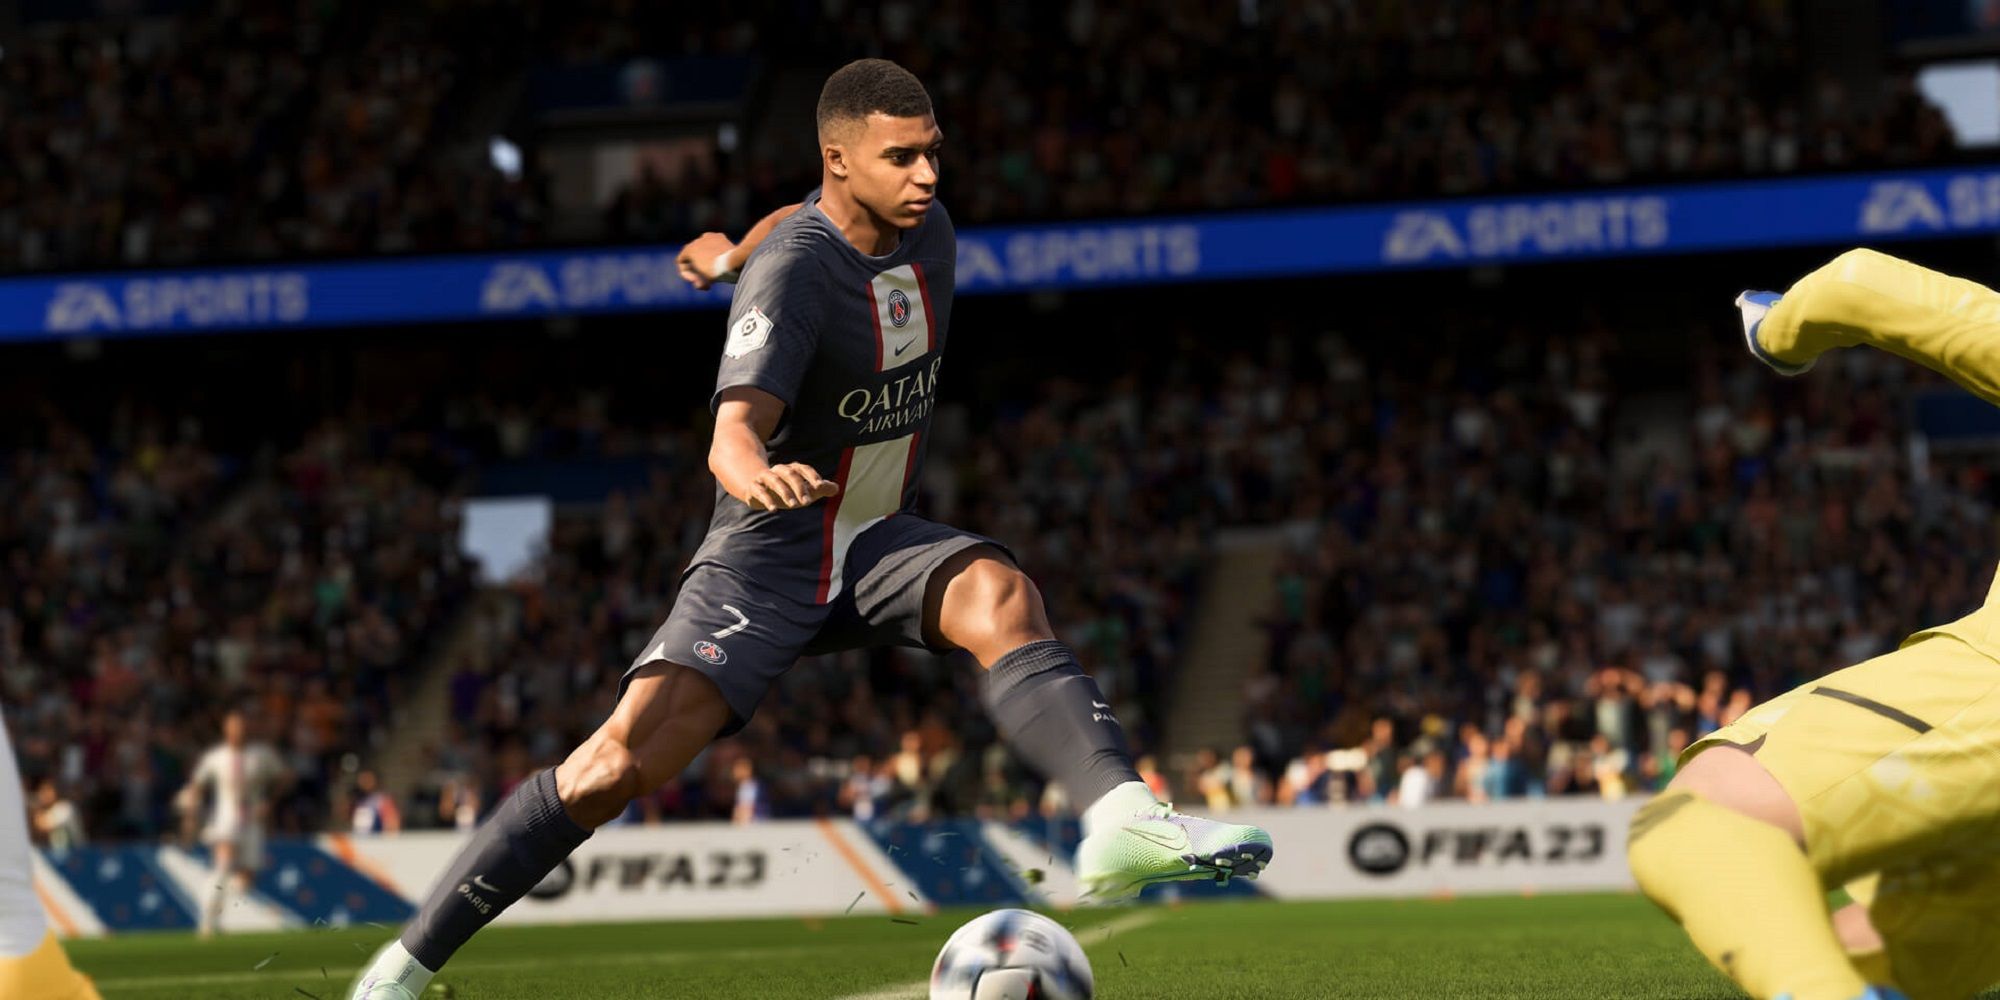 FIFA 23 official screenshot showing Mbappe controlling the ball